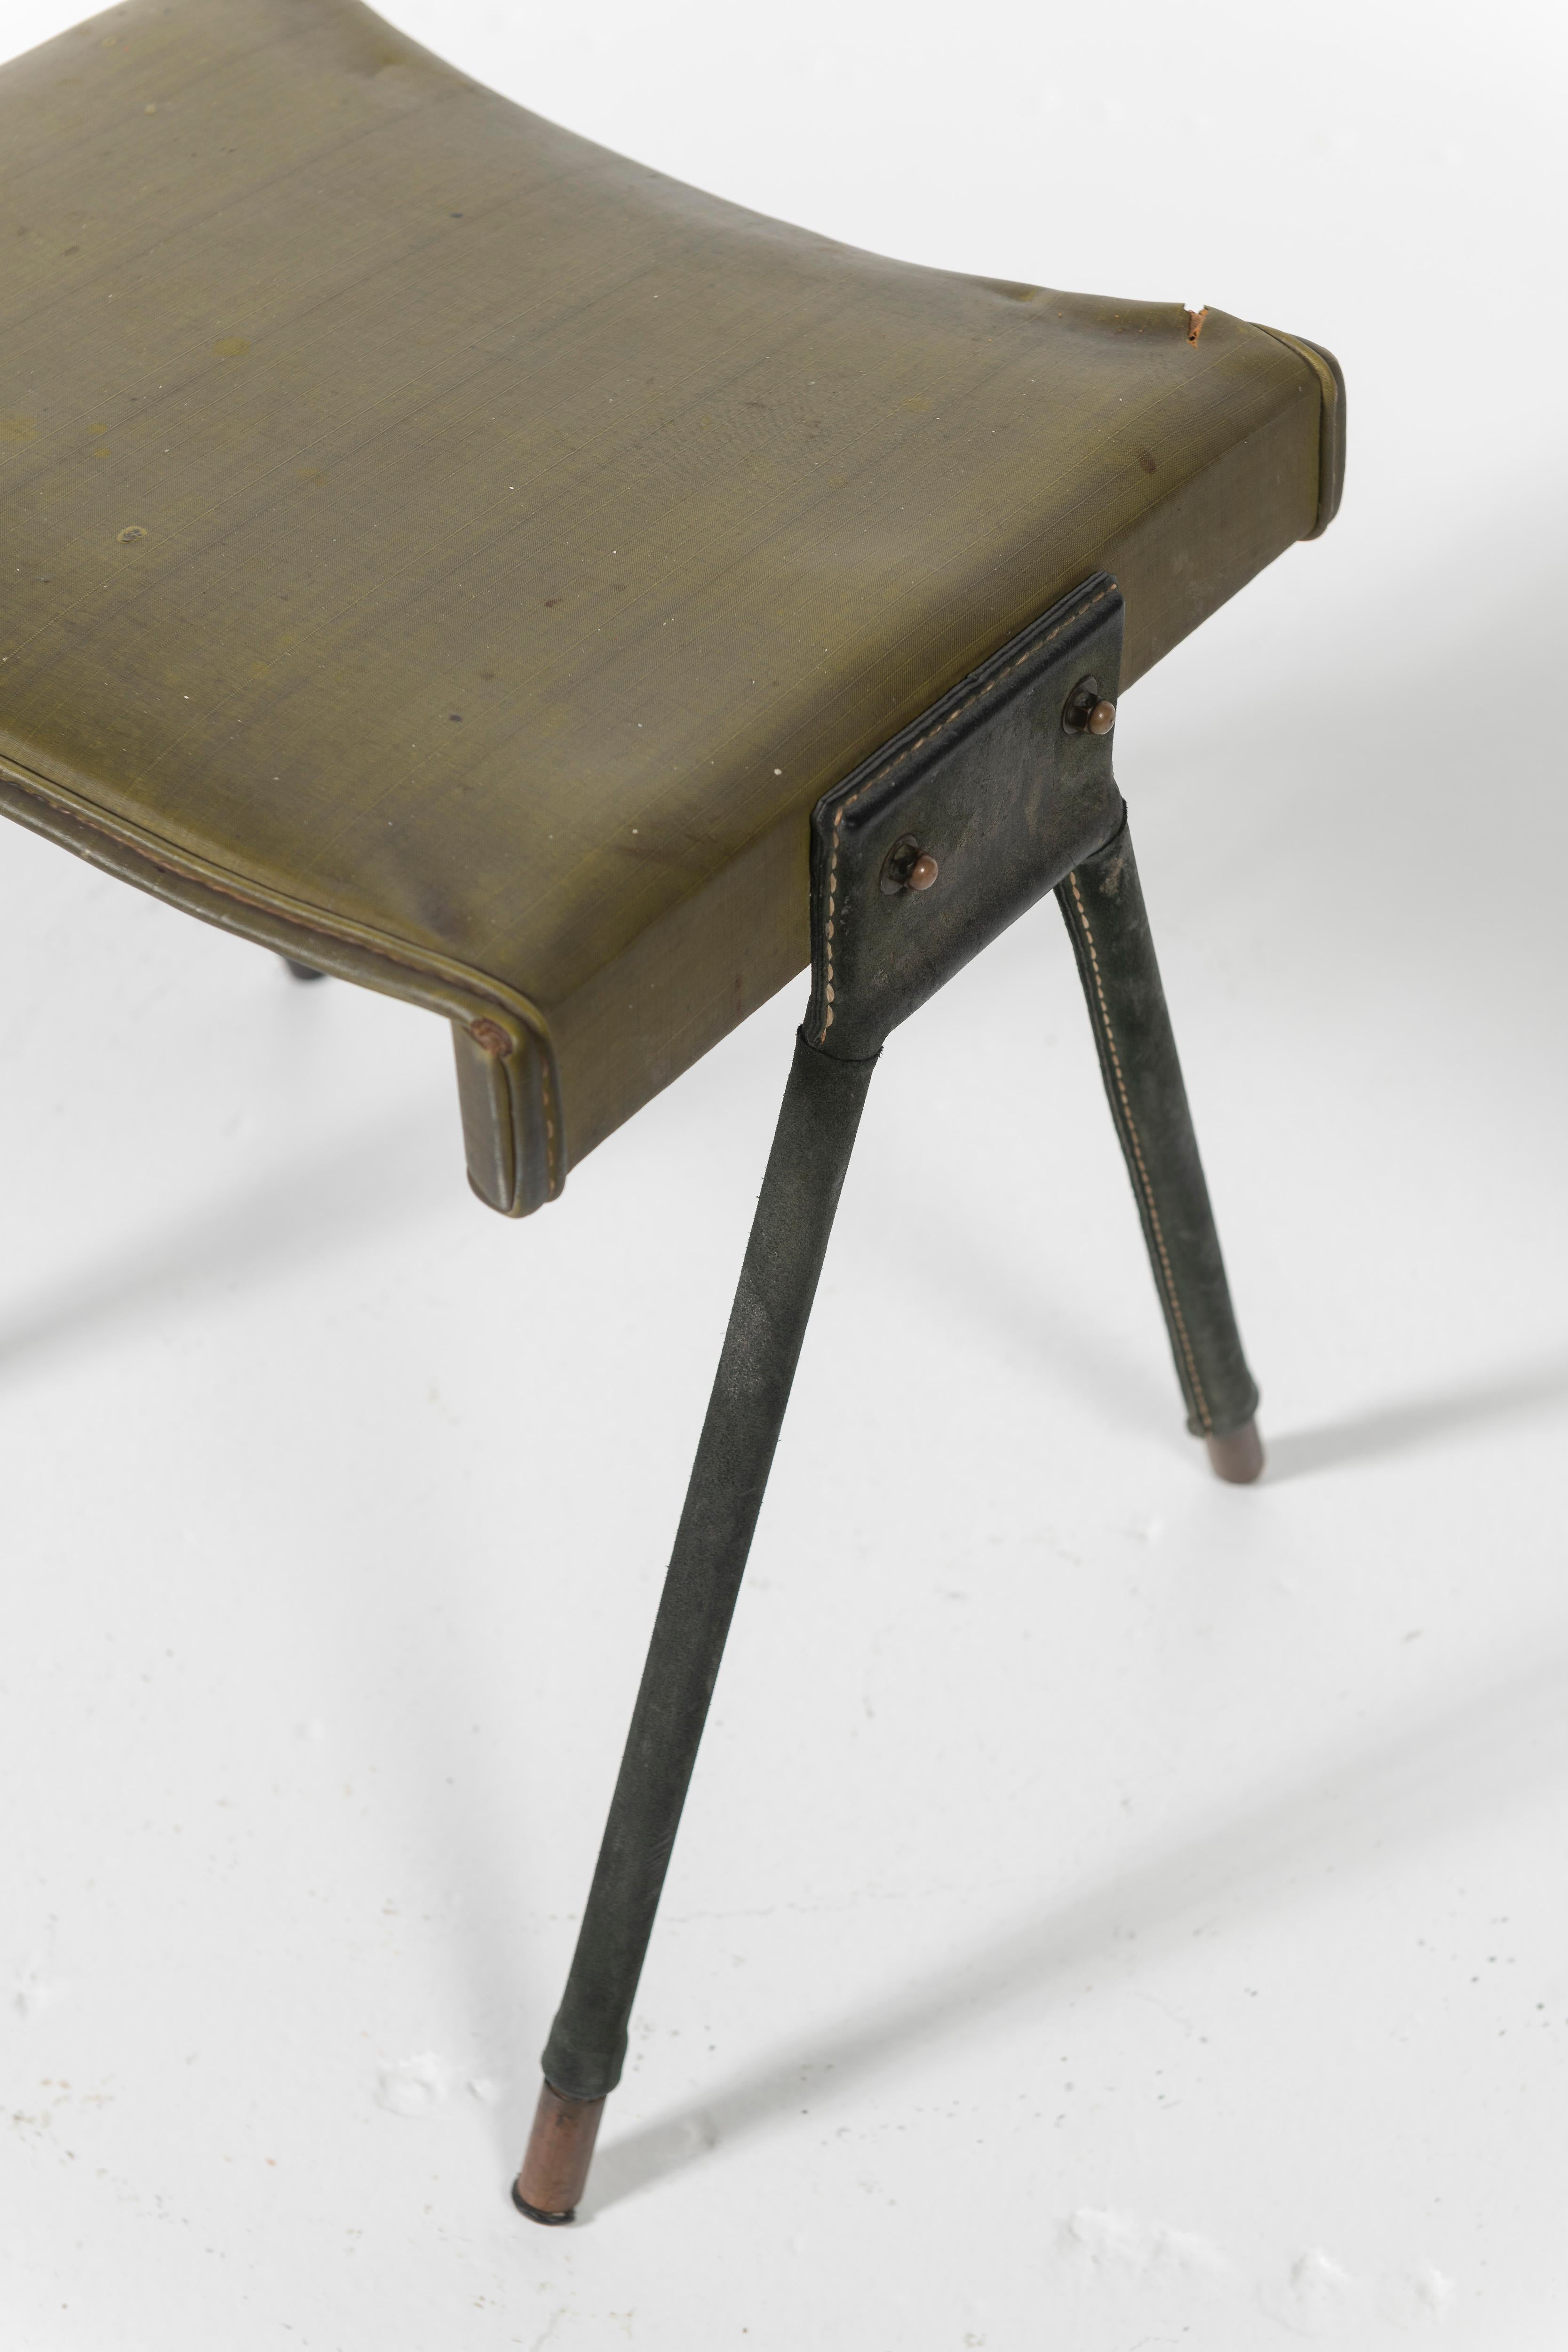 Metal Jacques Adnet Stool Covered in Green Leather with Saddlestiching